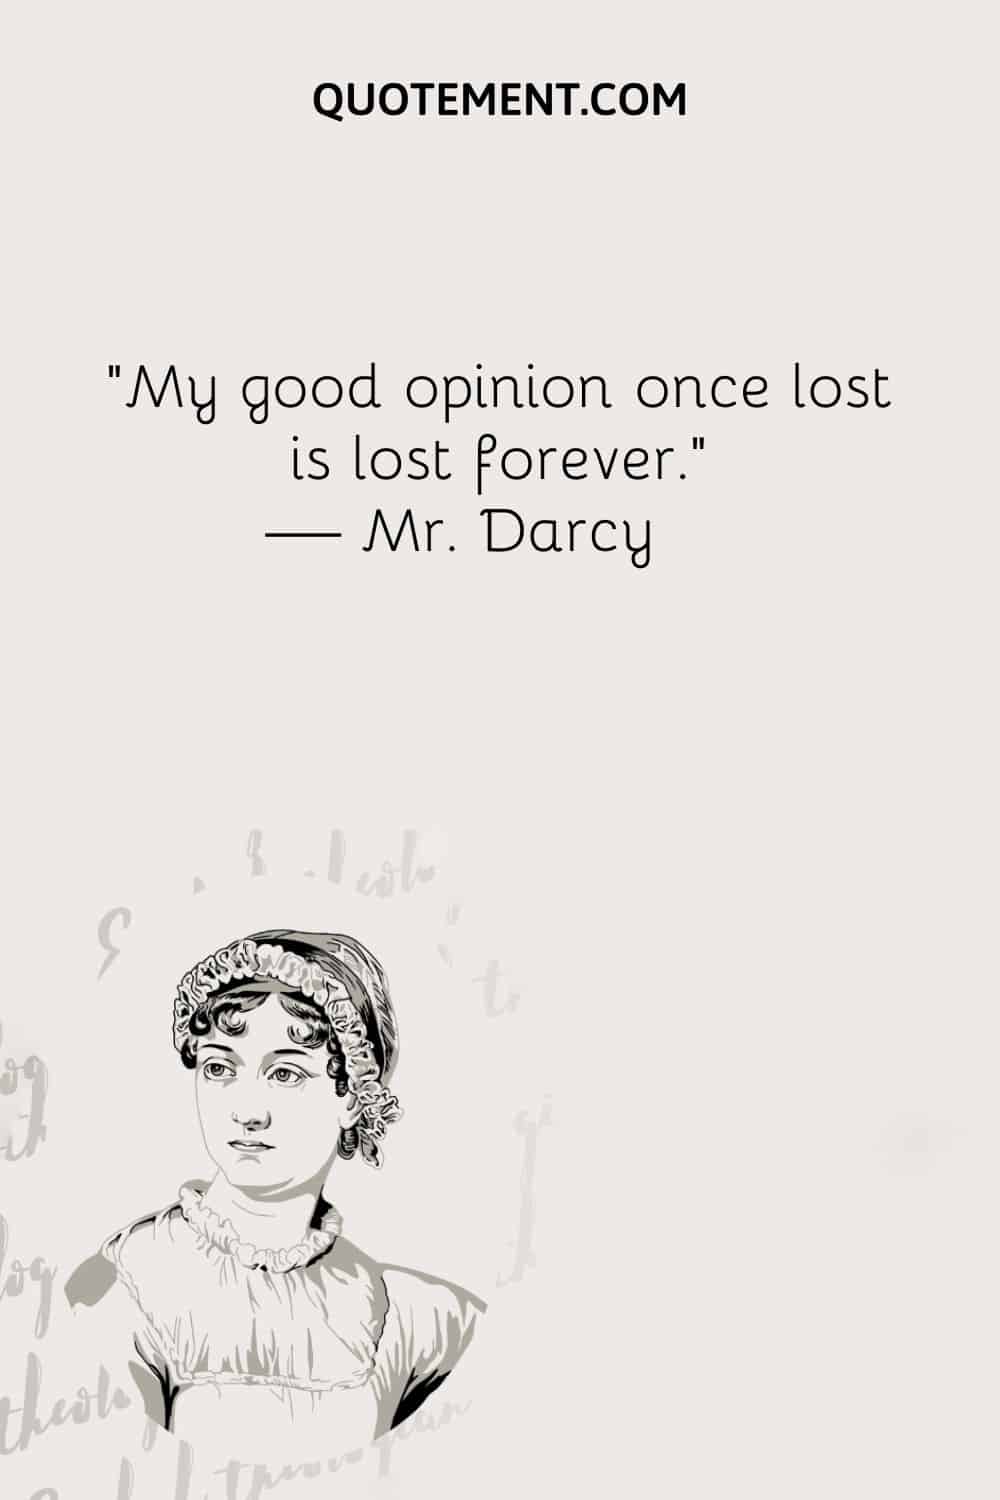 My good opinion once lost is lost forever. — Mr. Darcy